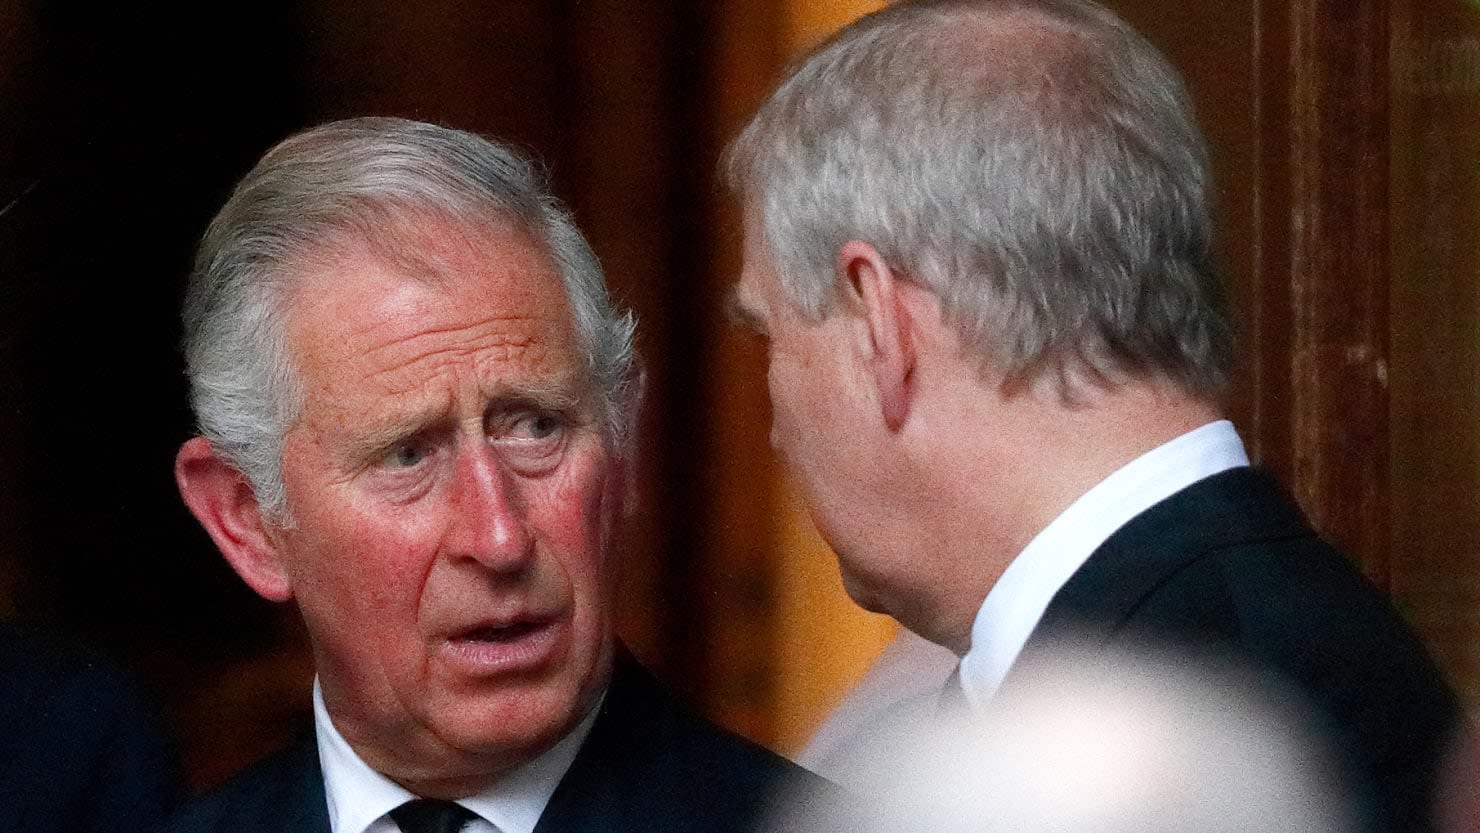 Charles Threatens to Defund Prince Andrew Unless He Vacates Royal Lodge